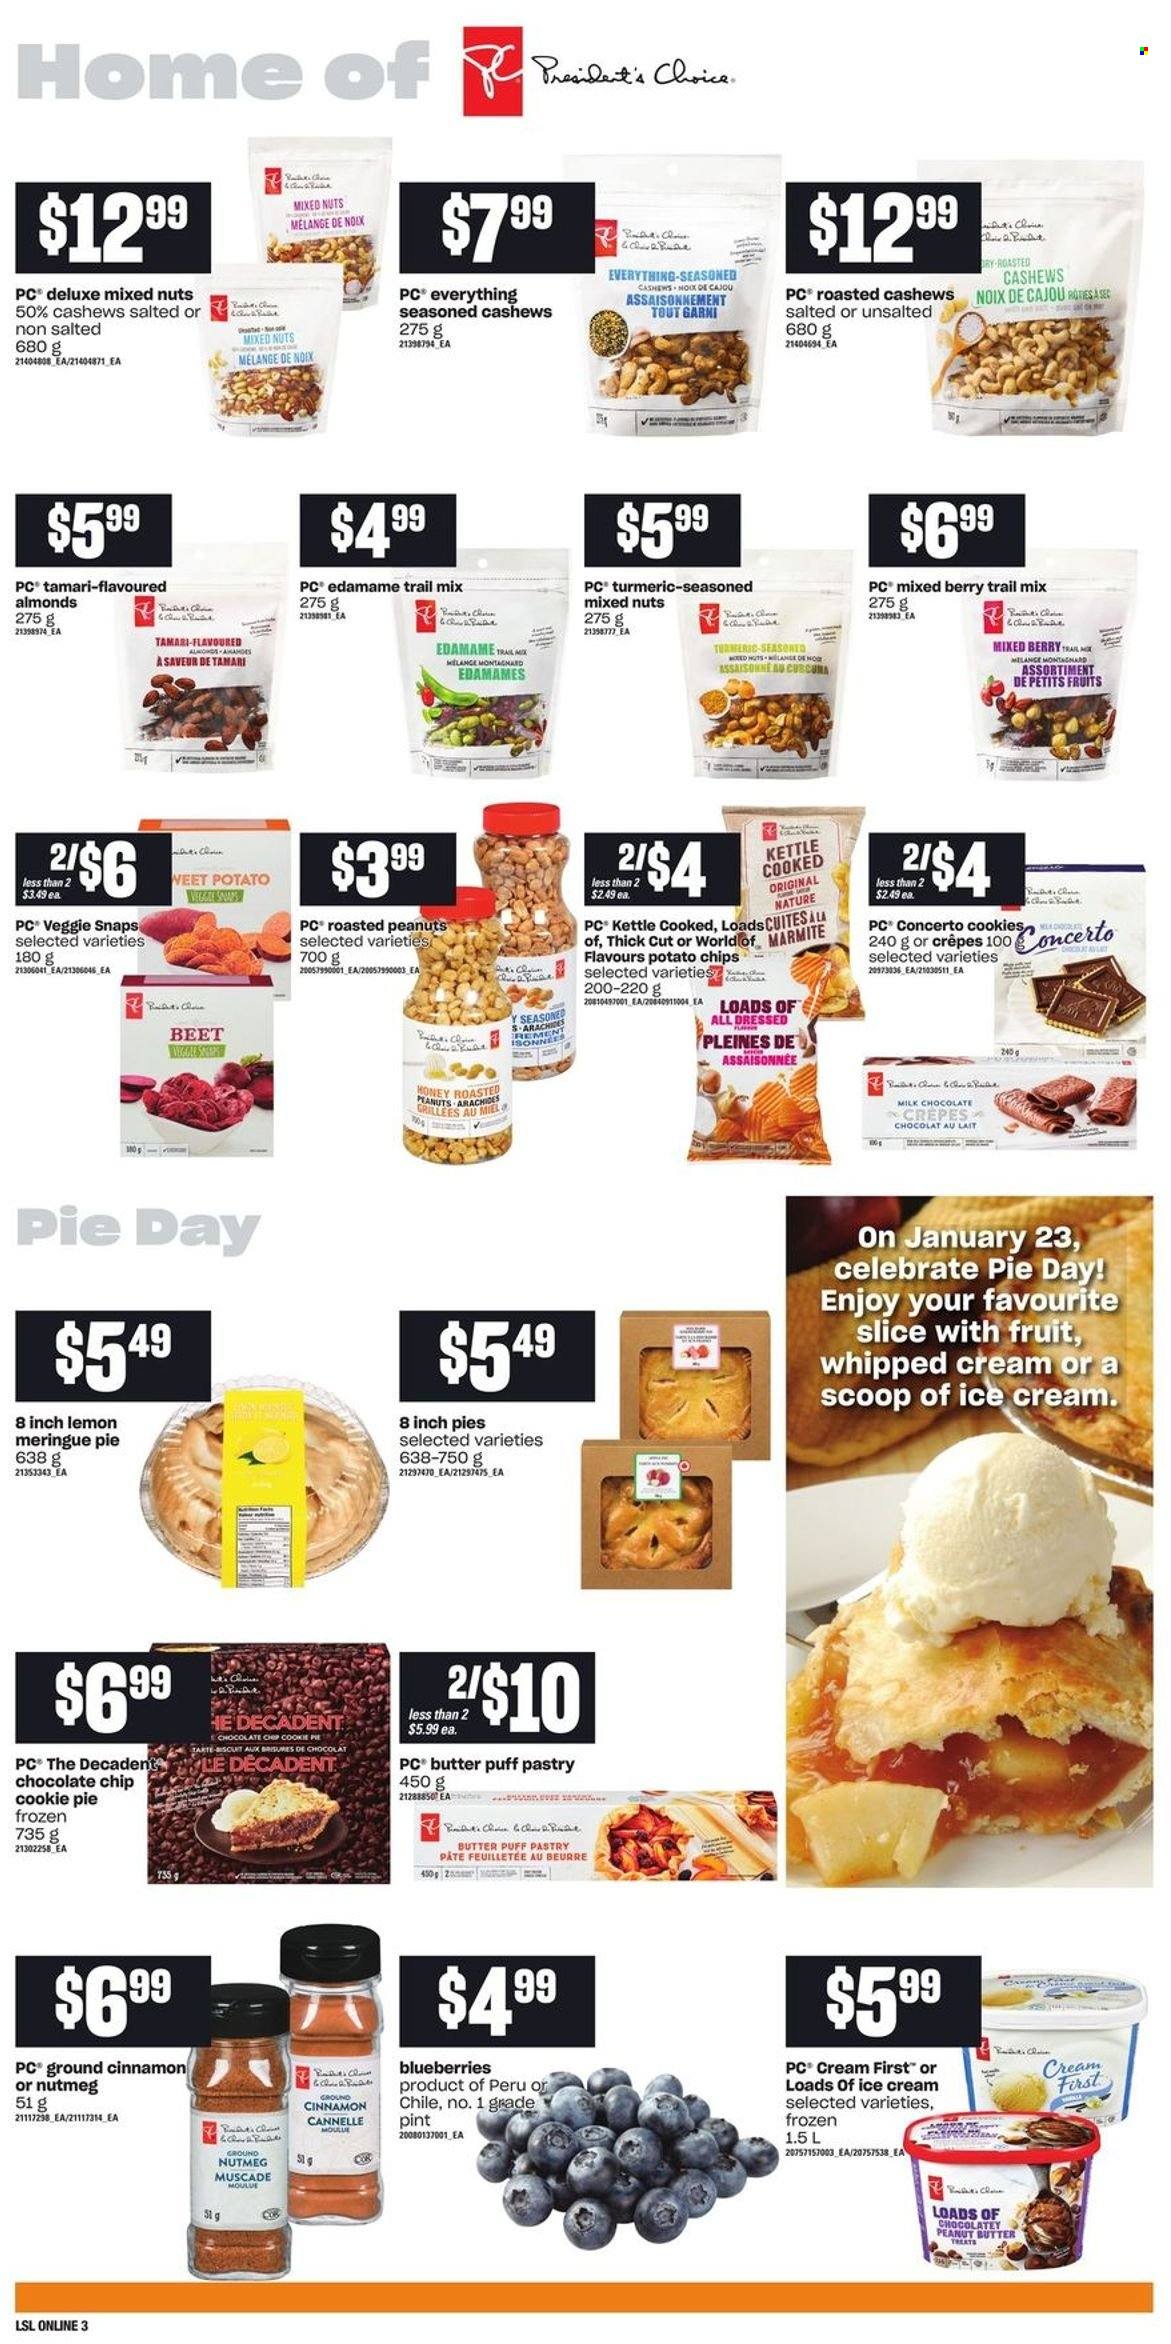 thumbnail - Loblaws Flyer - January 20, 2022 - January 26, 2022 - Sales products - pie, Edamame, blueberries, whipped cream, puff pastry, ice cream, cookies, milk chocolate, potato chips, turmeric, nutmeg, cinnamon, honey, peanut butter, almonds, cashews, roasted peanuts, peanuts, mixed nuts, trail mix, Veet. Page 7.